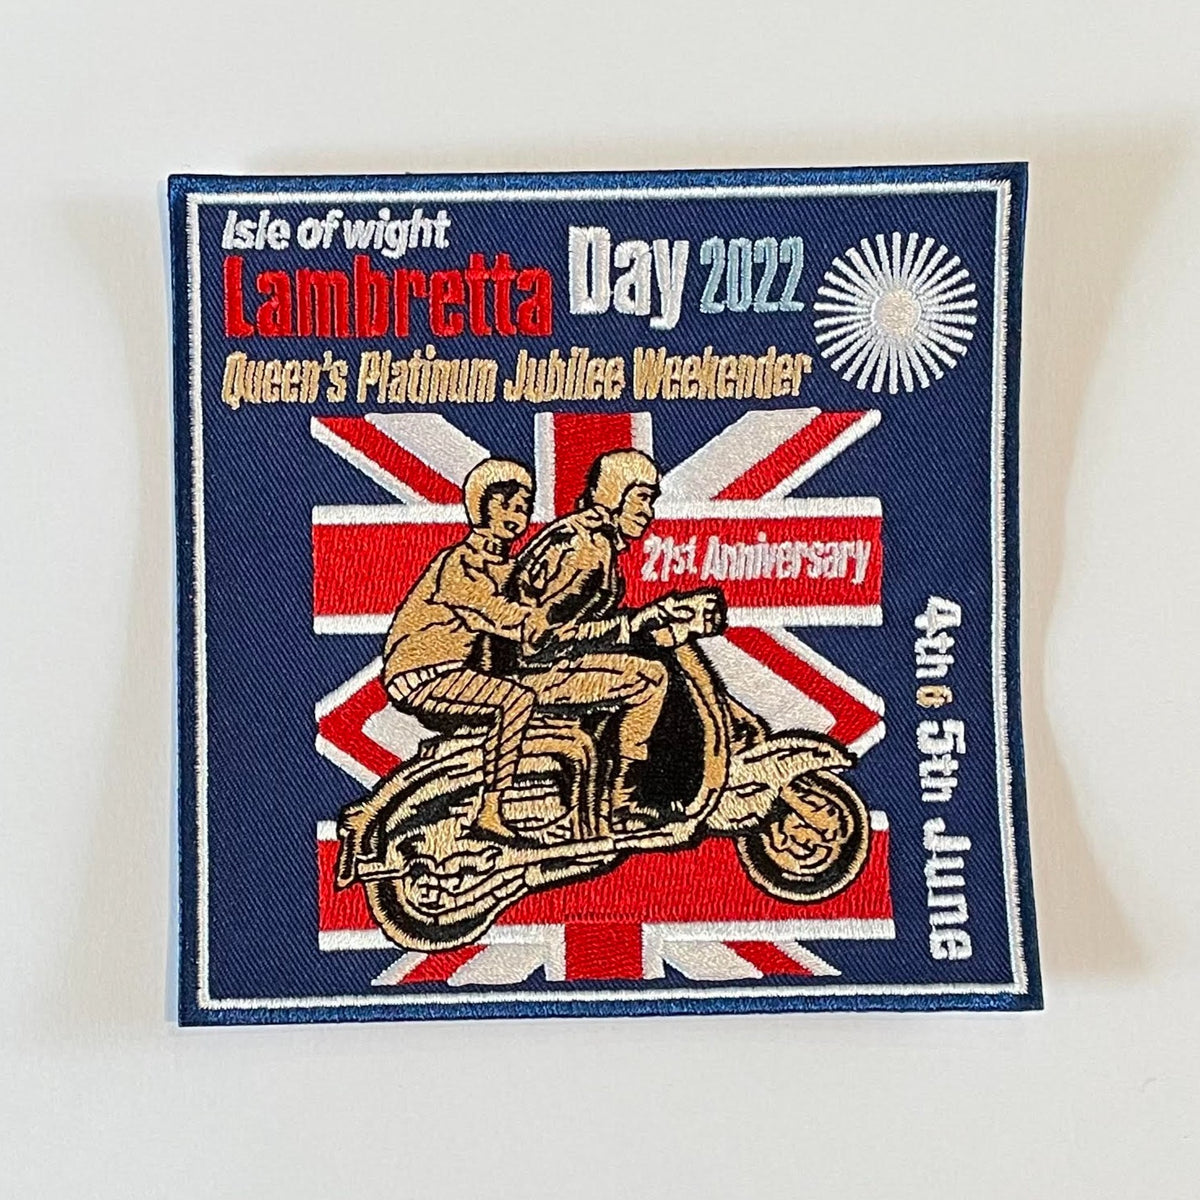 Isle of Wight Lambretta Day 2022 Queens Platinum Jubilee Weekender - Embroidered Patch